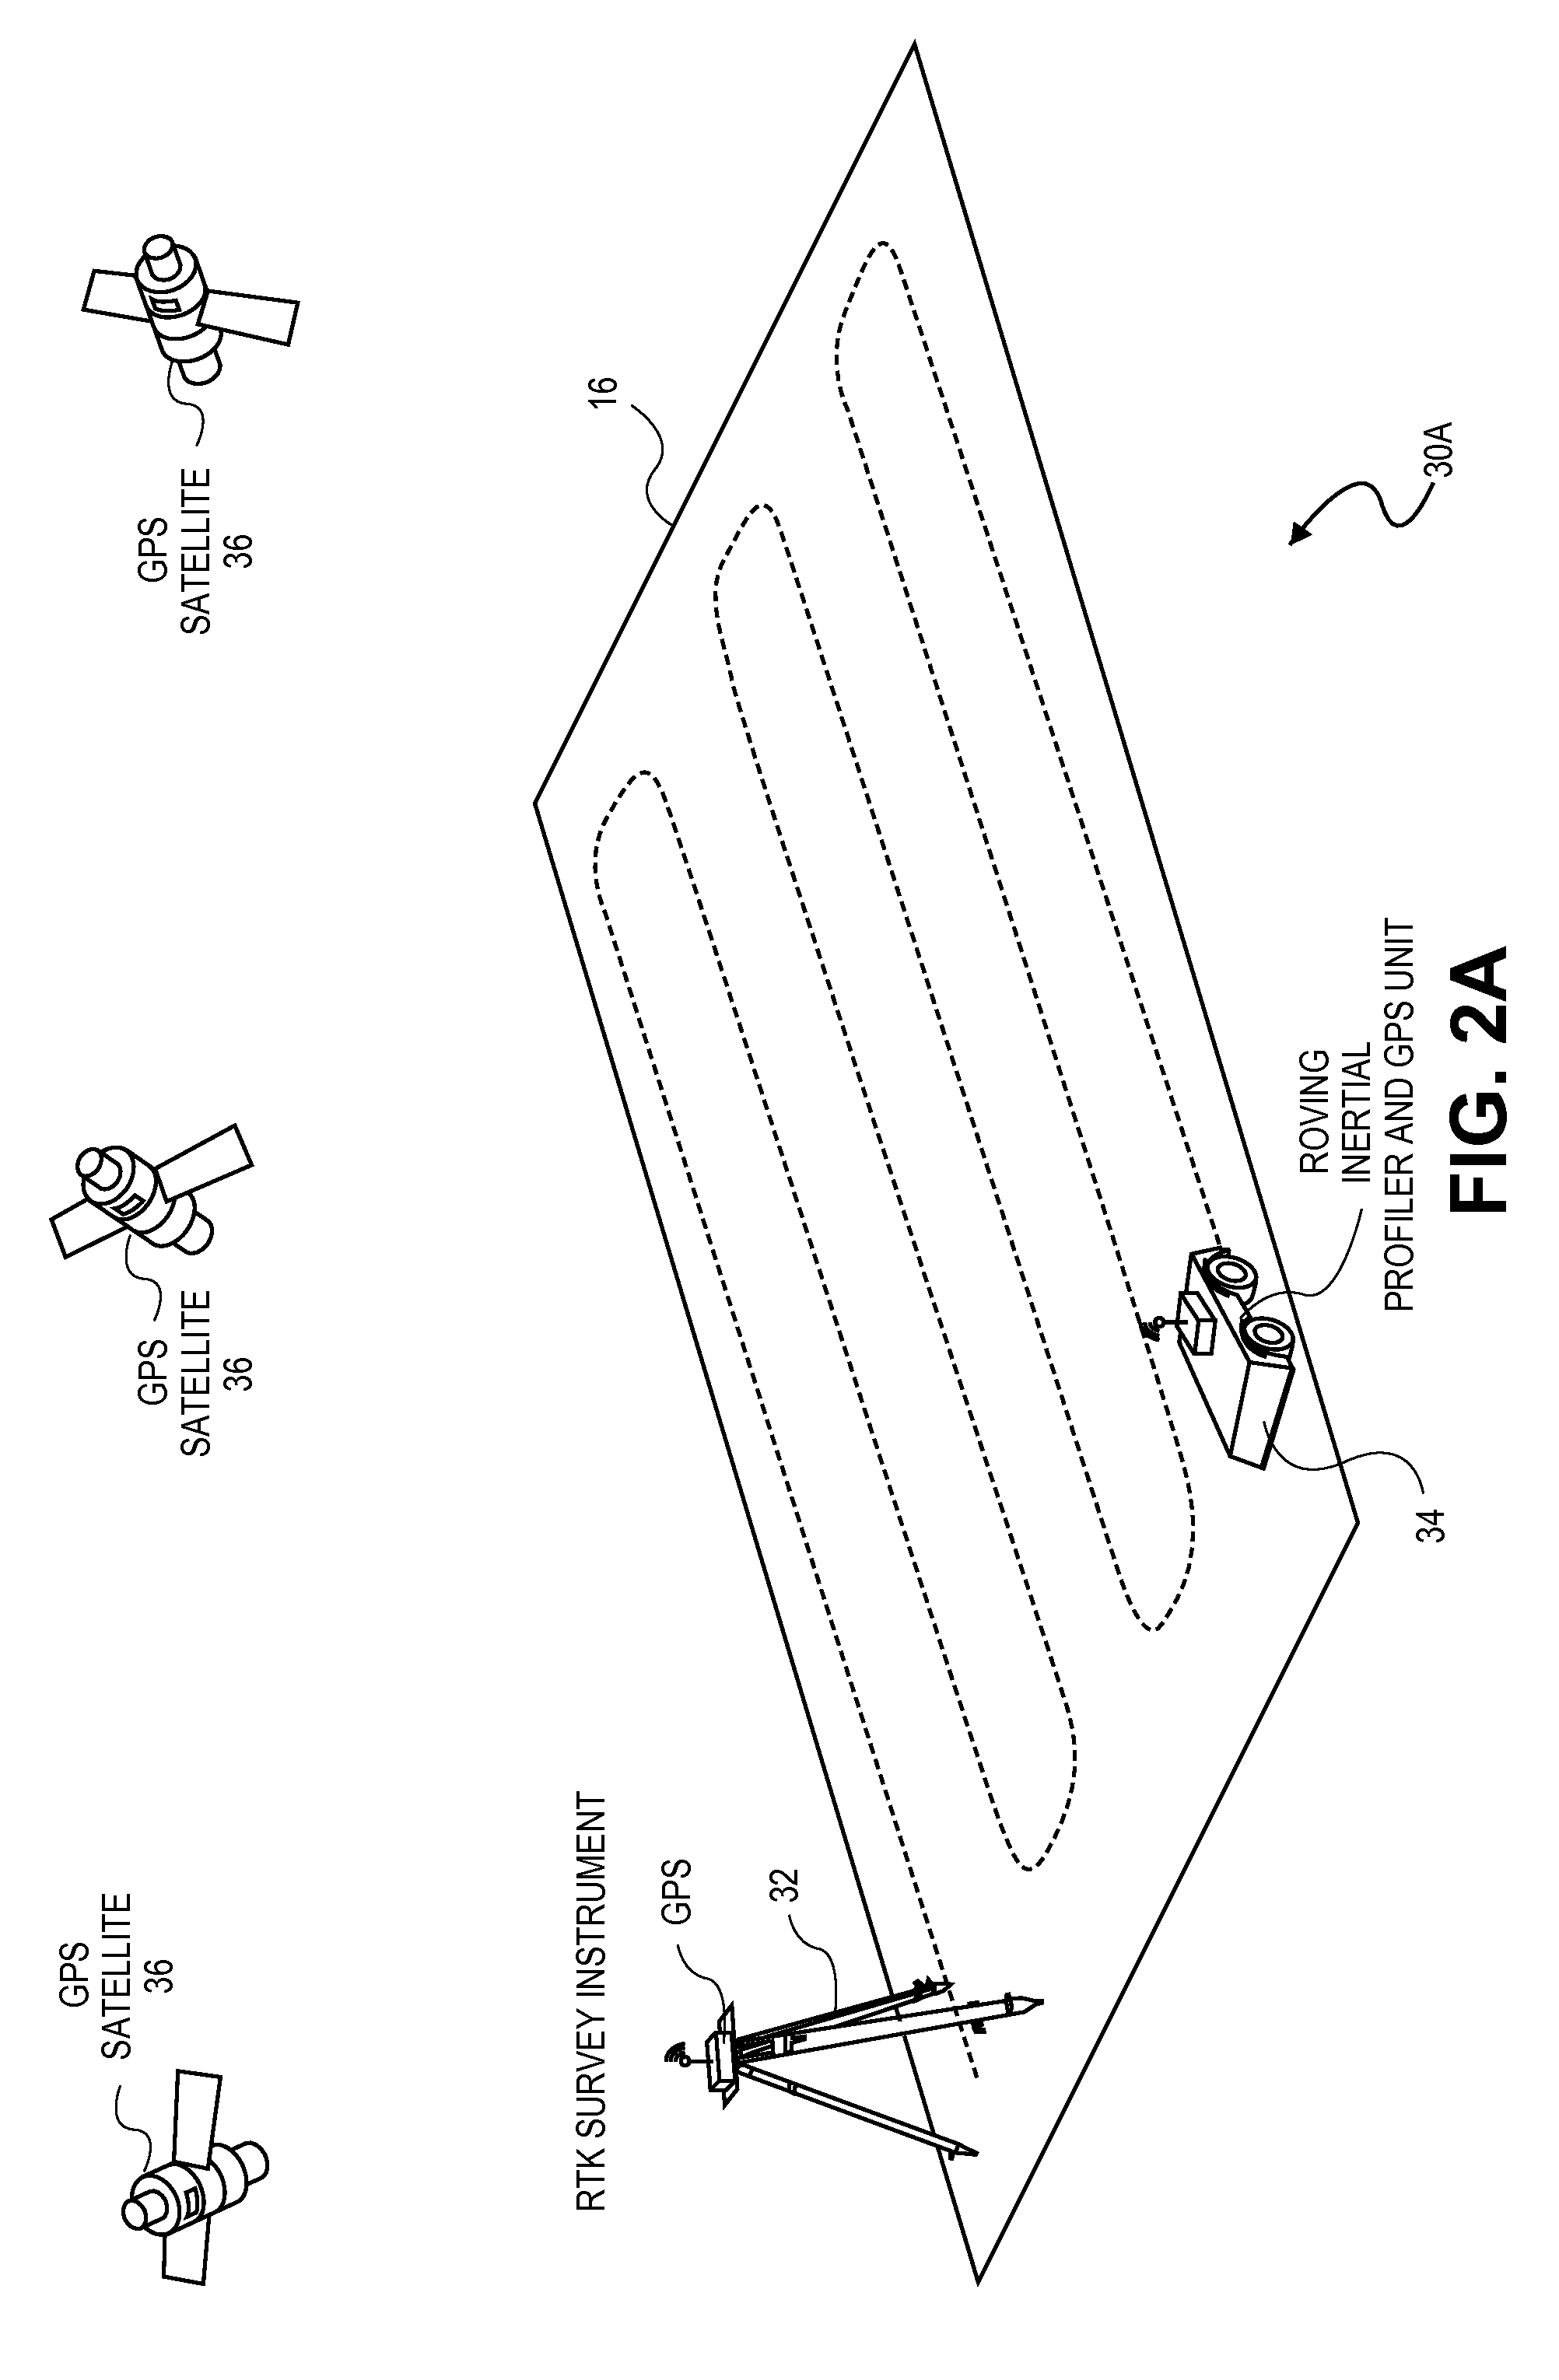 Apparatus for generating high resolution surface topology map using surface profiling and surveying instrumentation